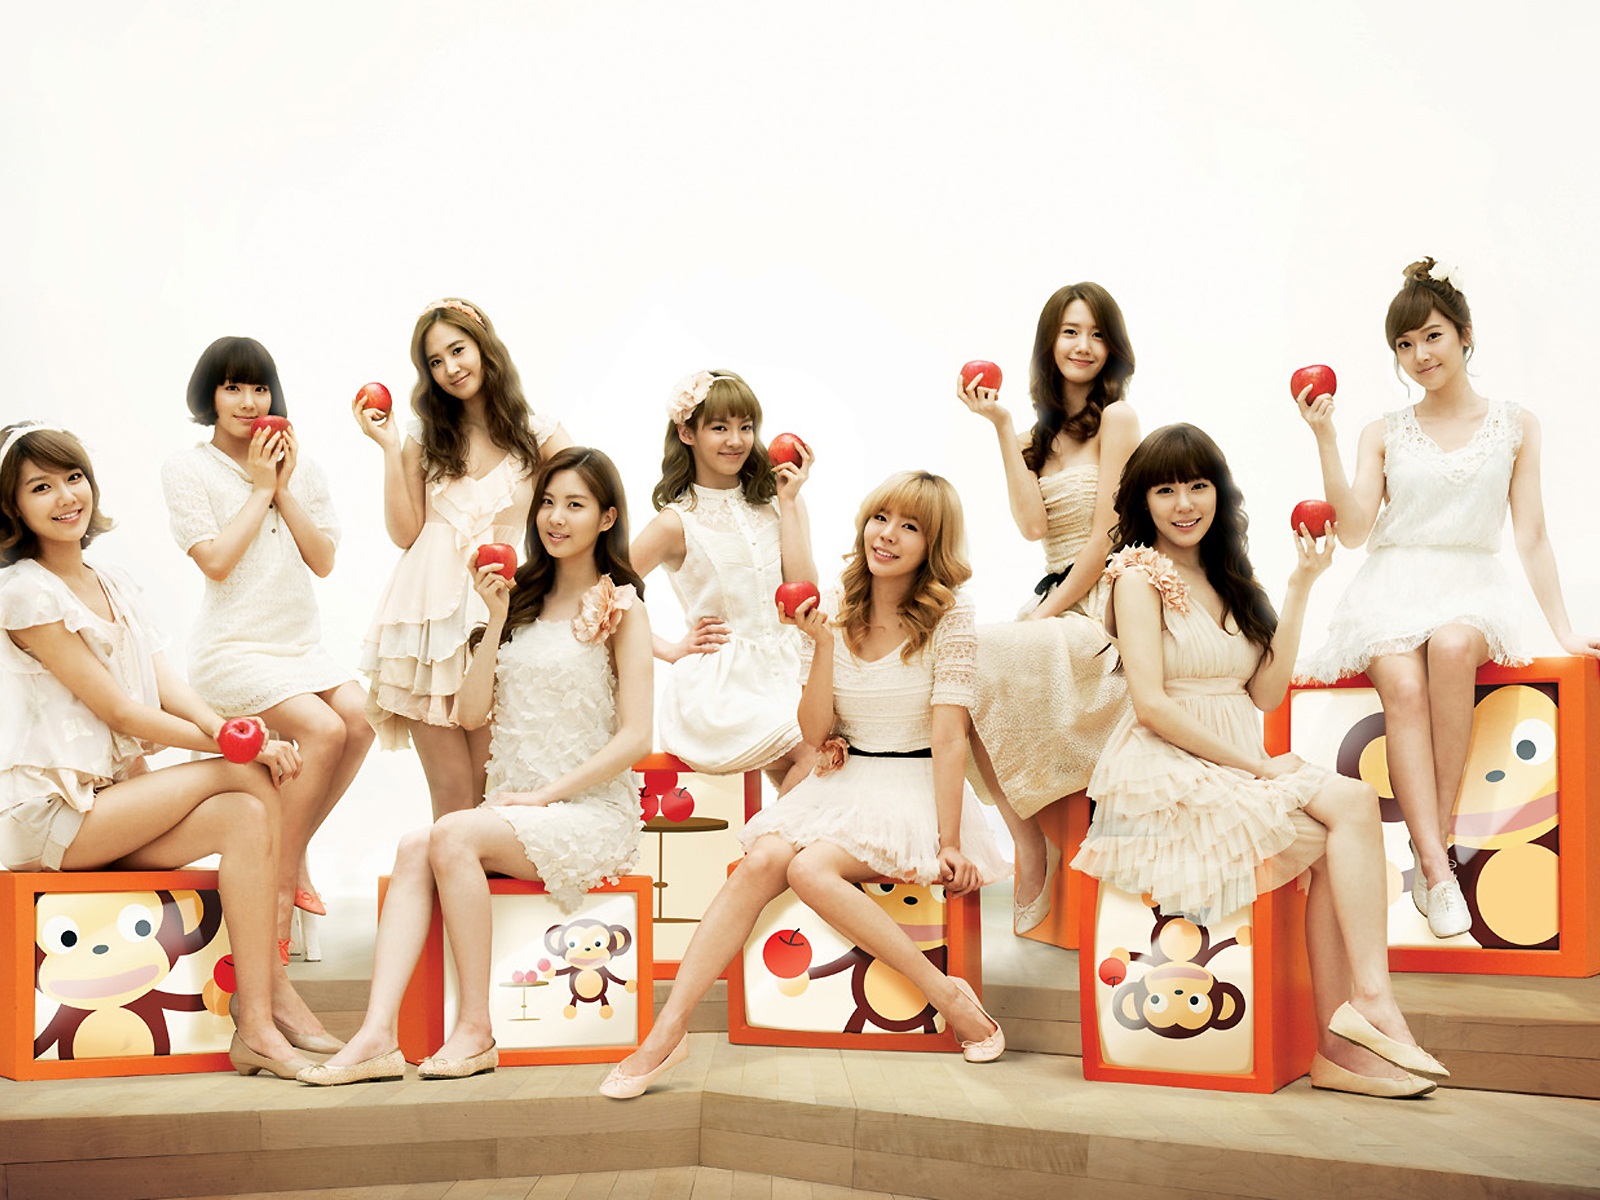 Girls Generation latest HD wallpapers collection #16 - 1600x1200